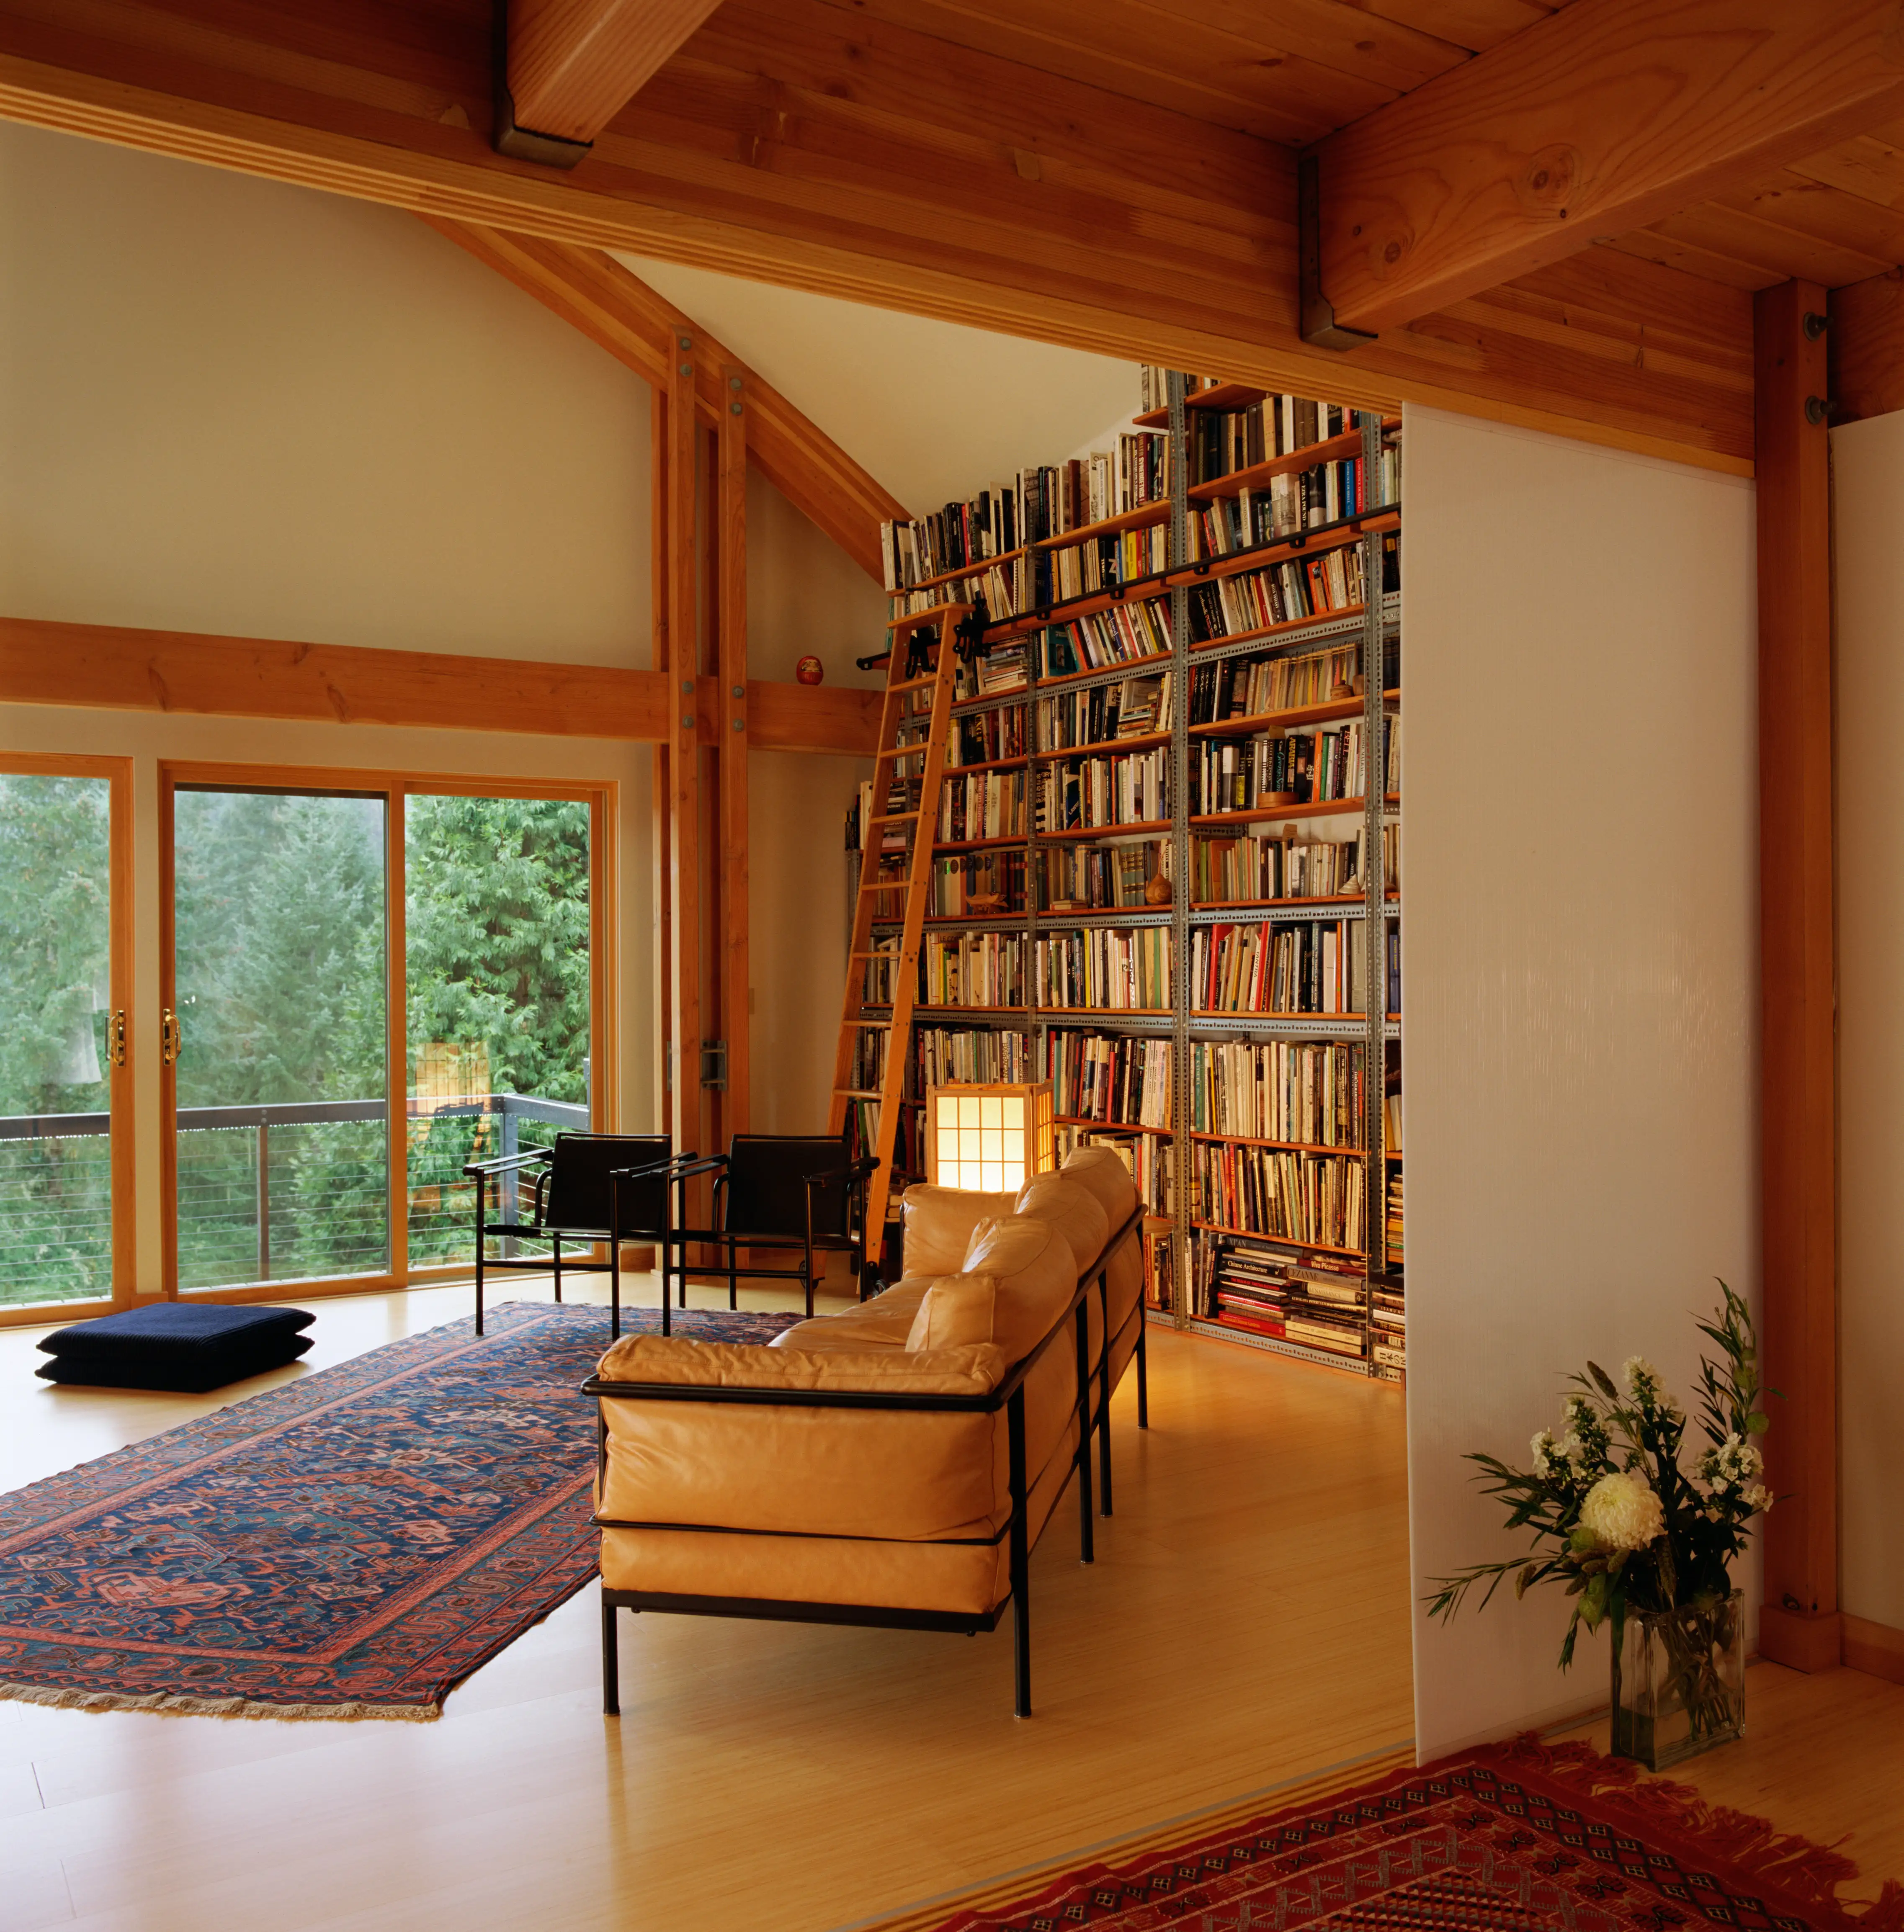 A residential library with cool contemporary style